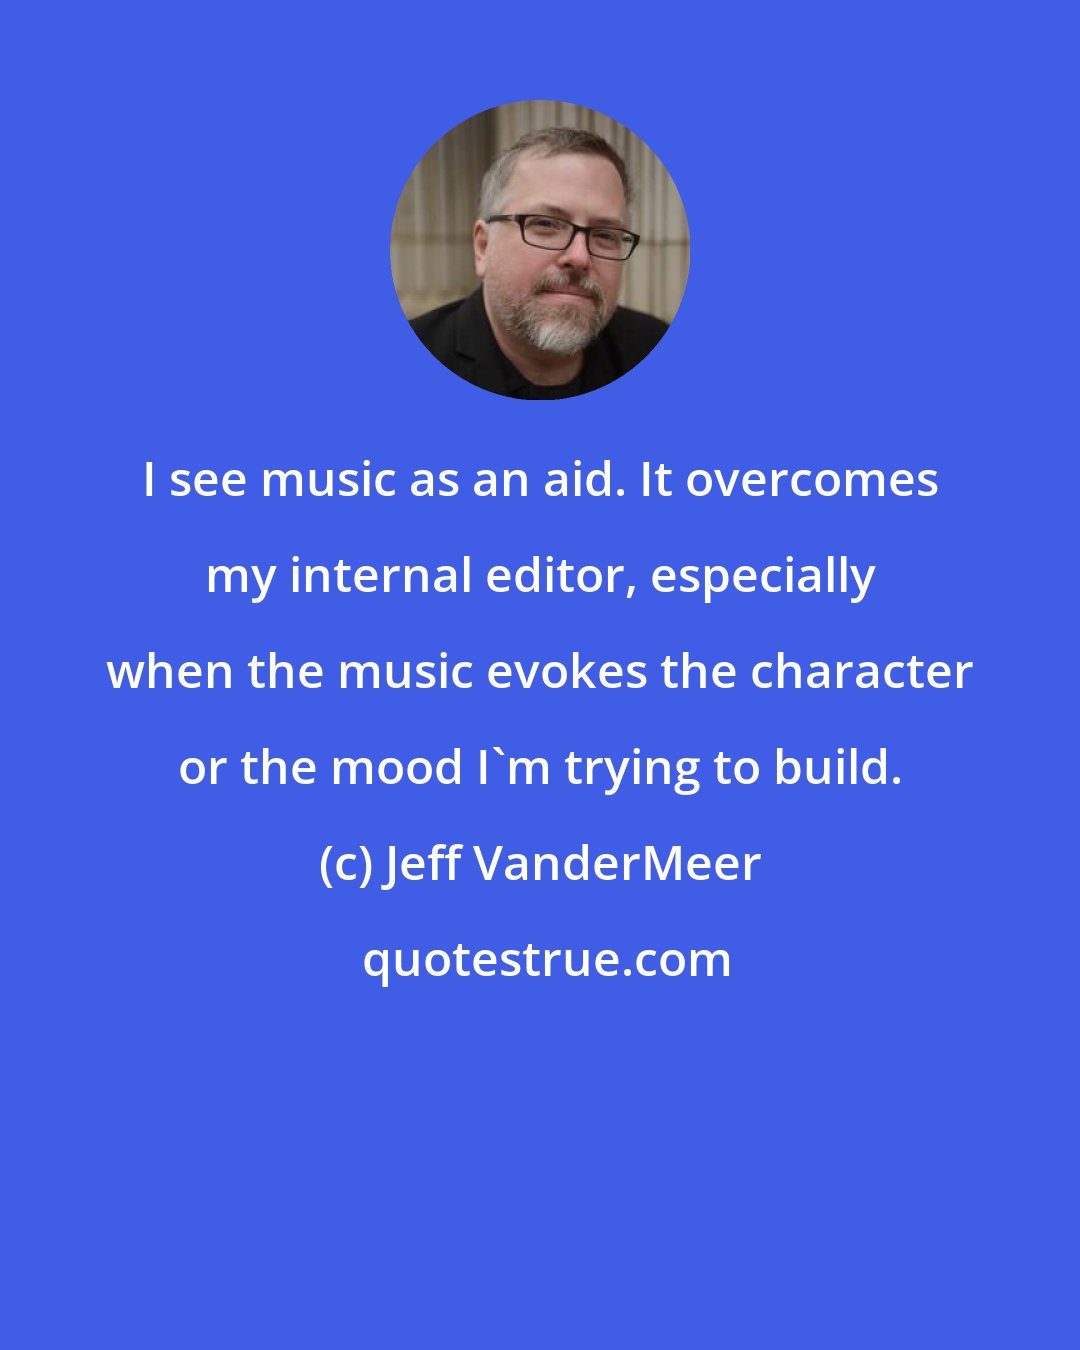 Jeff VanderMeer: I see music as an aid. It overcomes my internal editor, especially when the music evokes the character or the mood I'm trying to build.